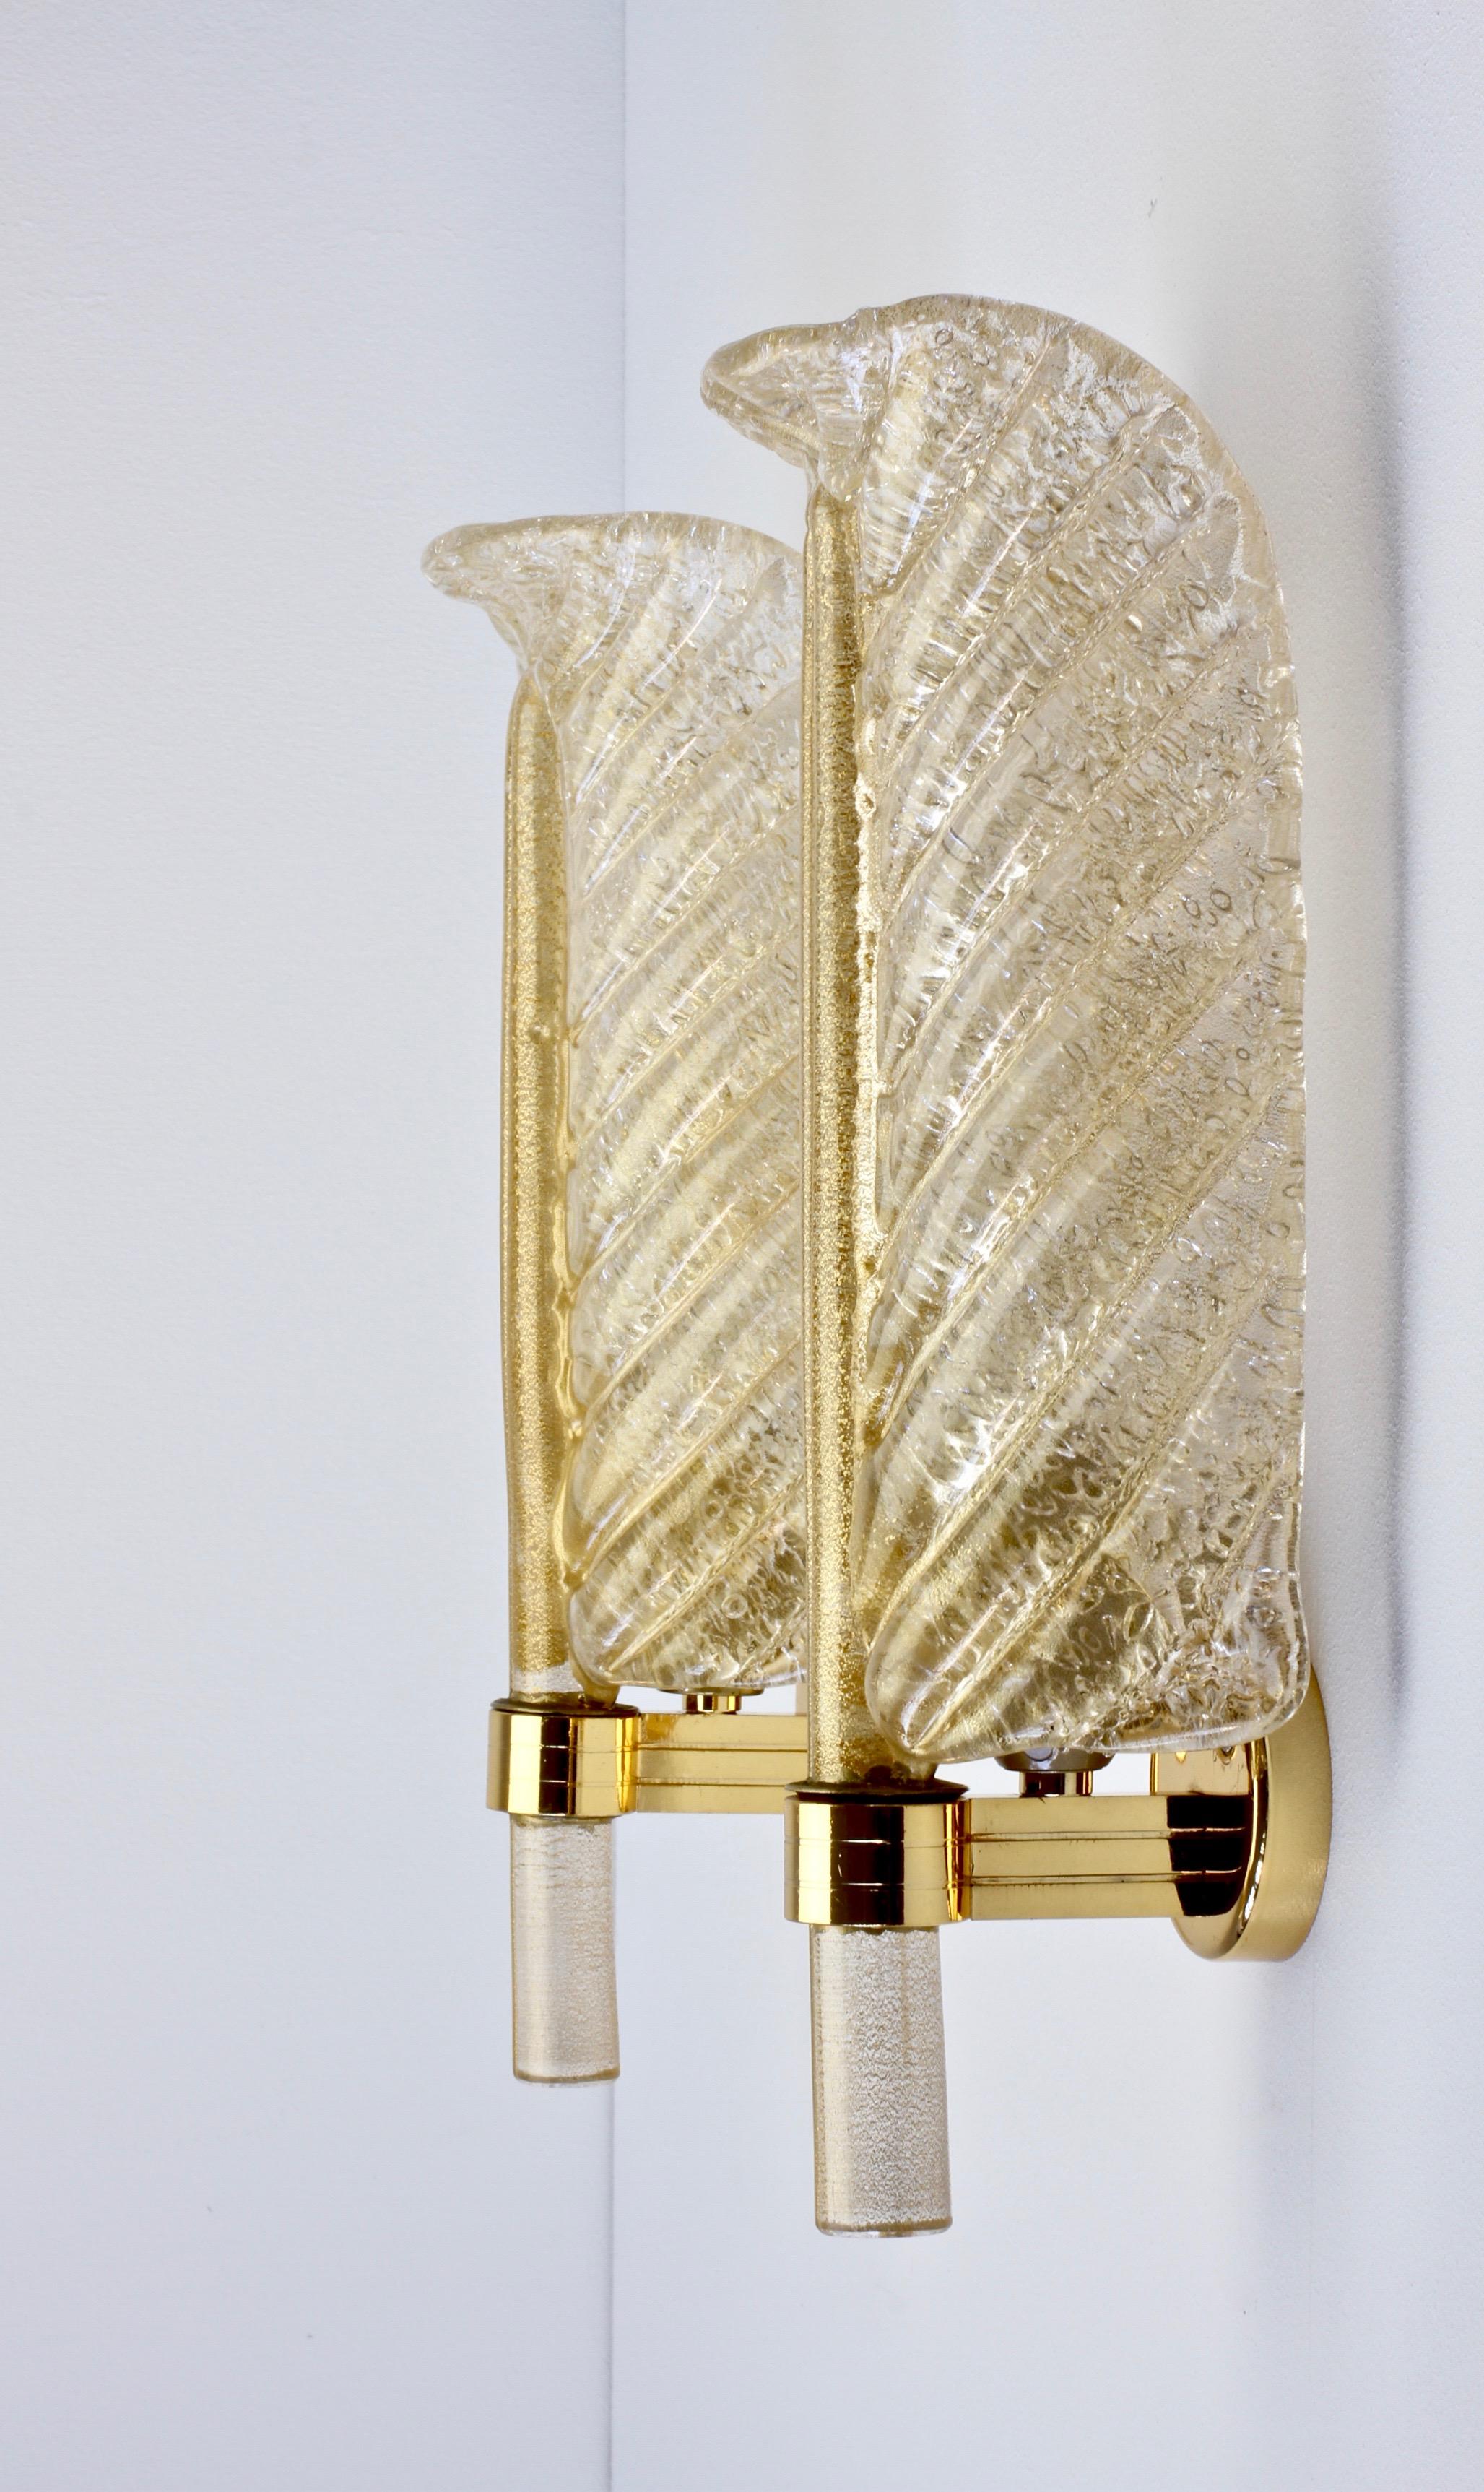 Barovier e Toso pair of Venetian neoclassical style Murano glass leaf sconces or wall-lights made in Italy, circa 1980s. Made of textured clear glass with 24-carat gold inclusions handmade and shaped in to the form of curved leaves. Suspended on